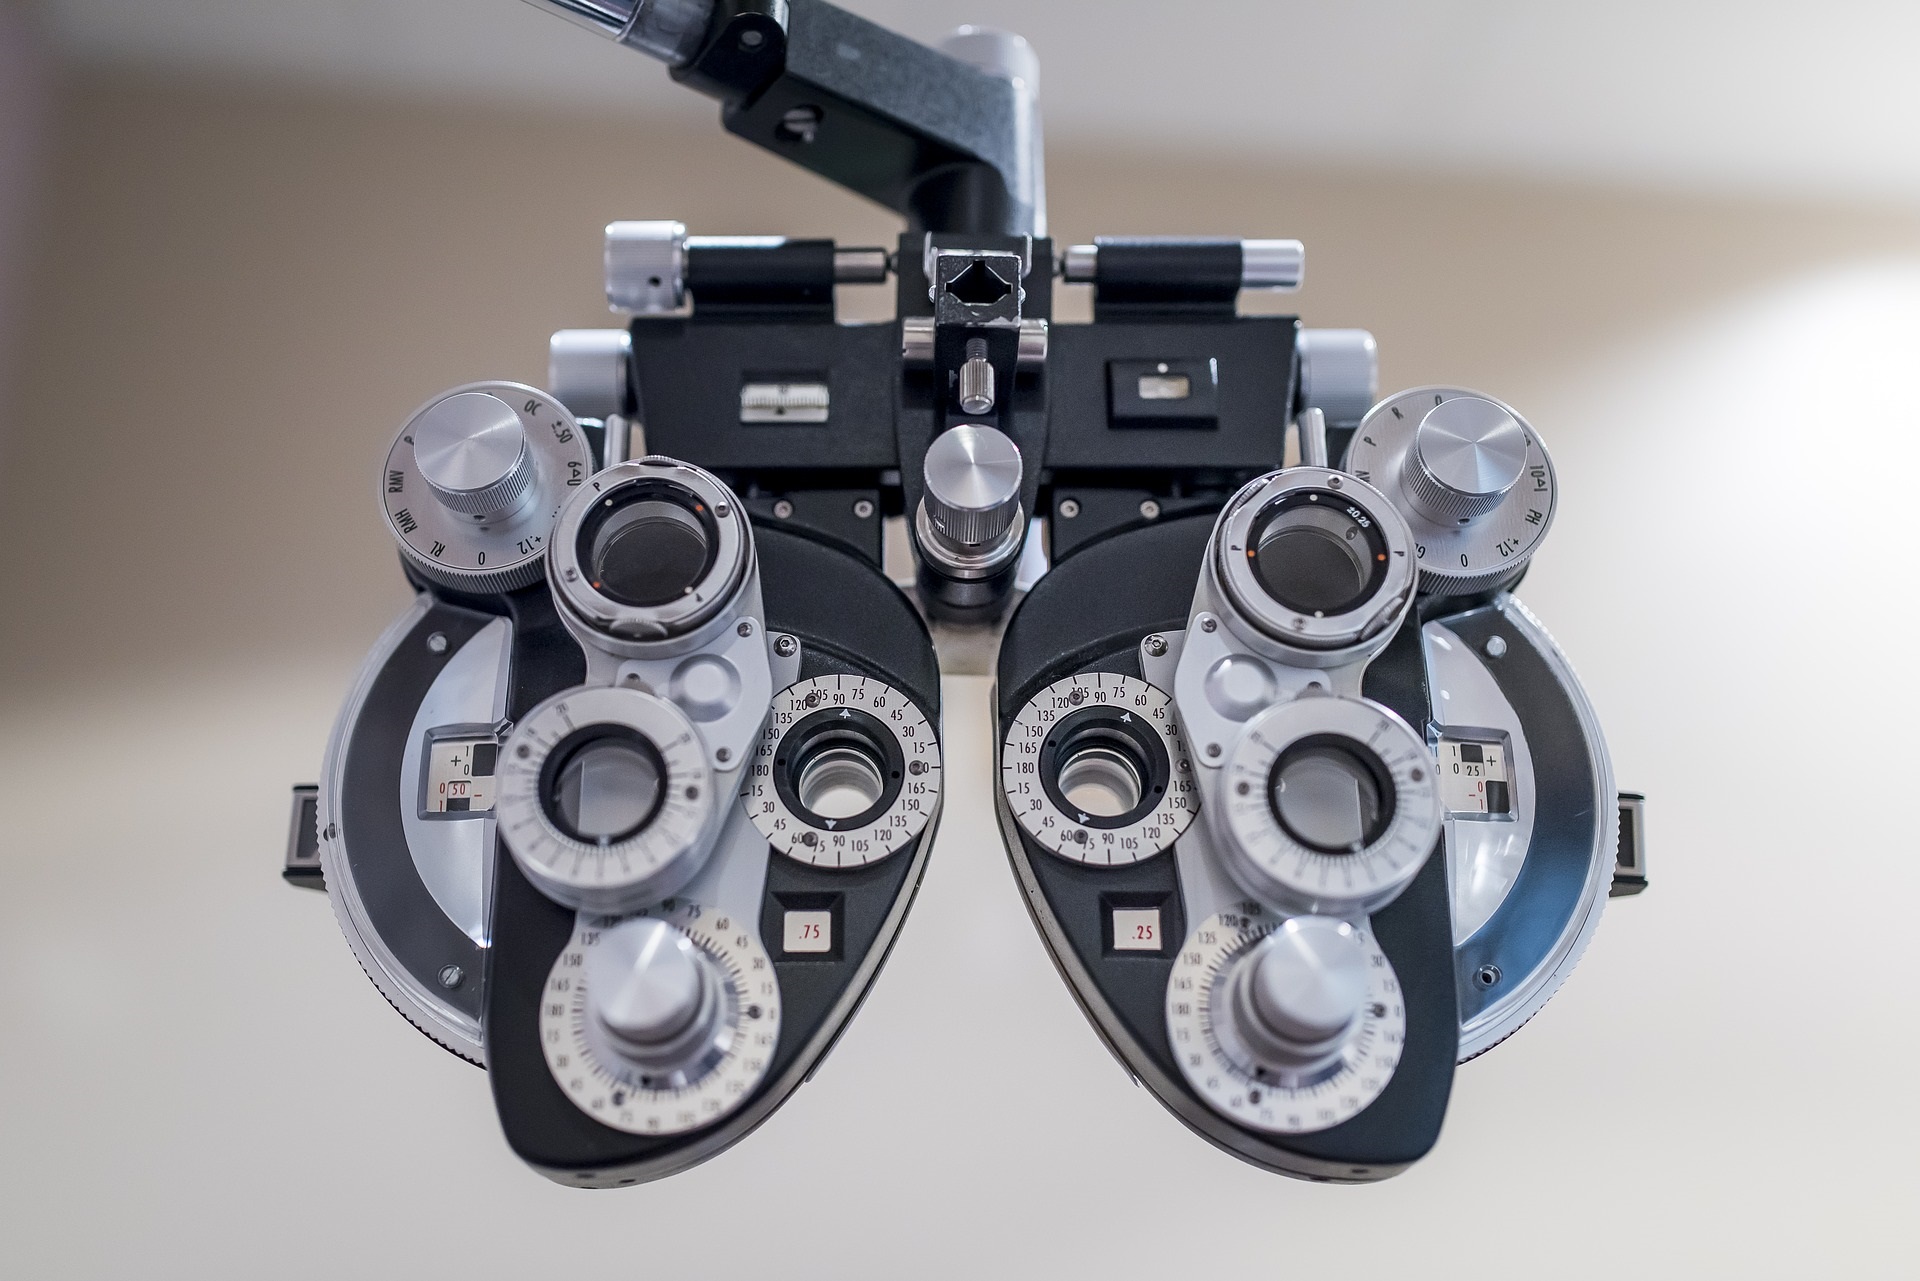 What Are Some Signs That You Might Need an Eye Exam?